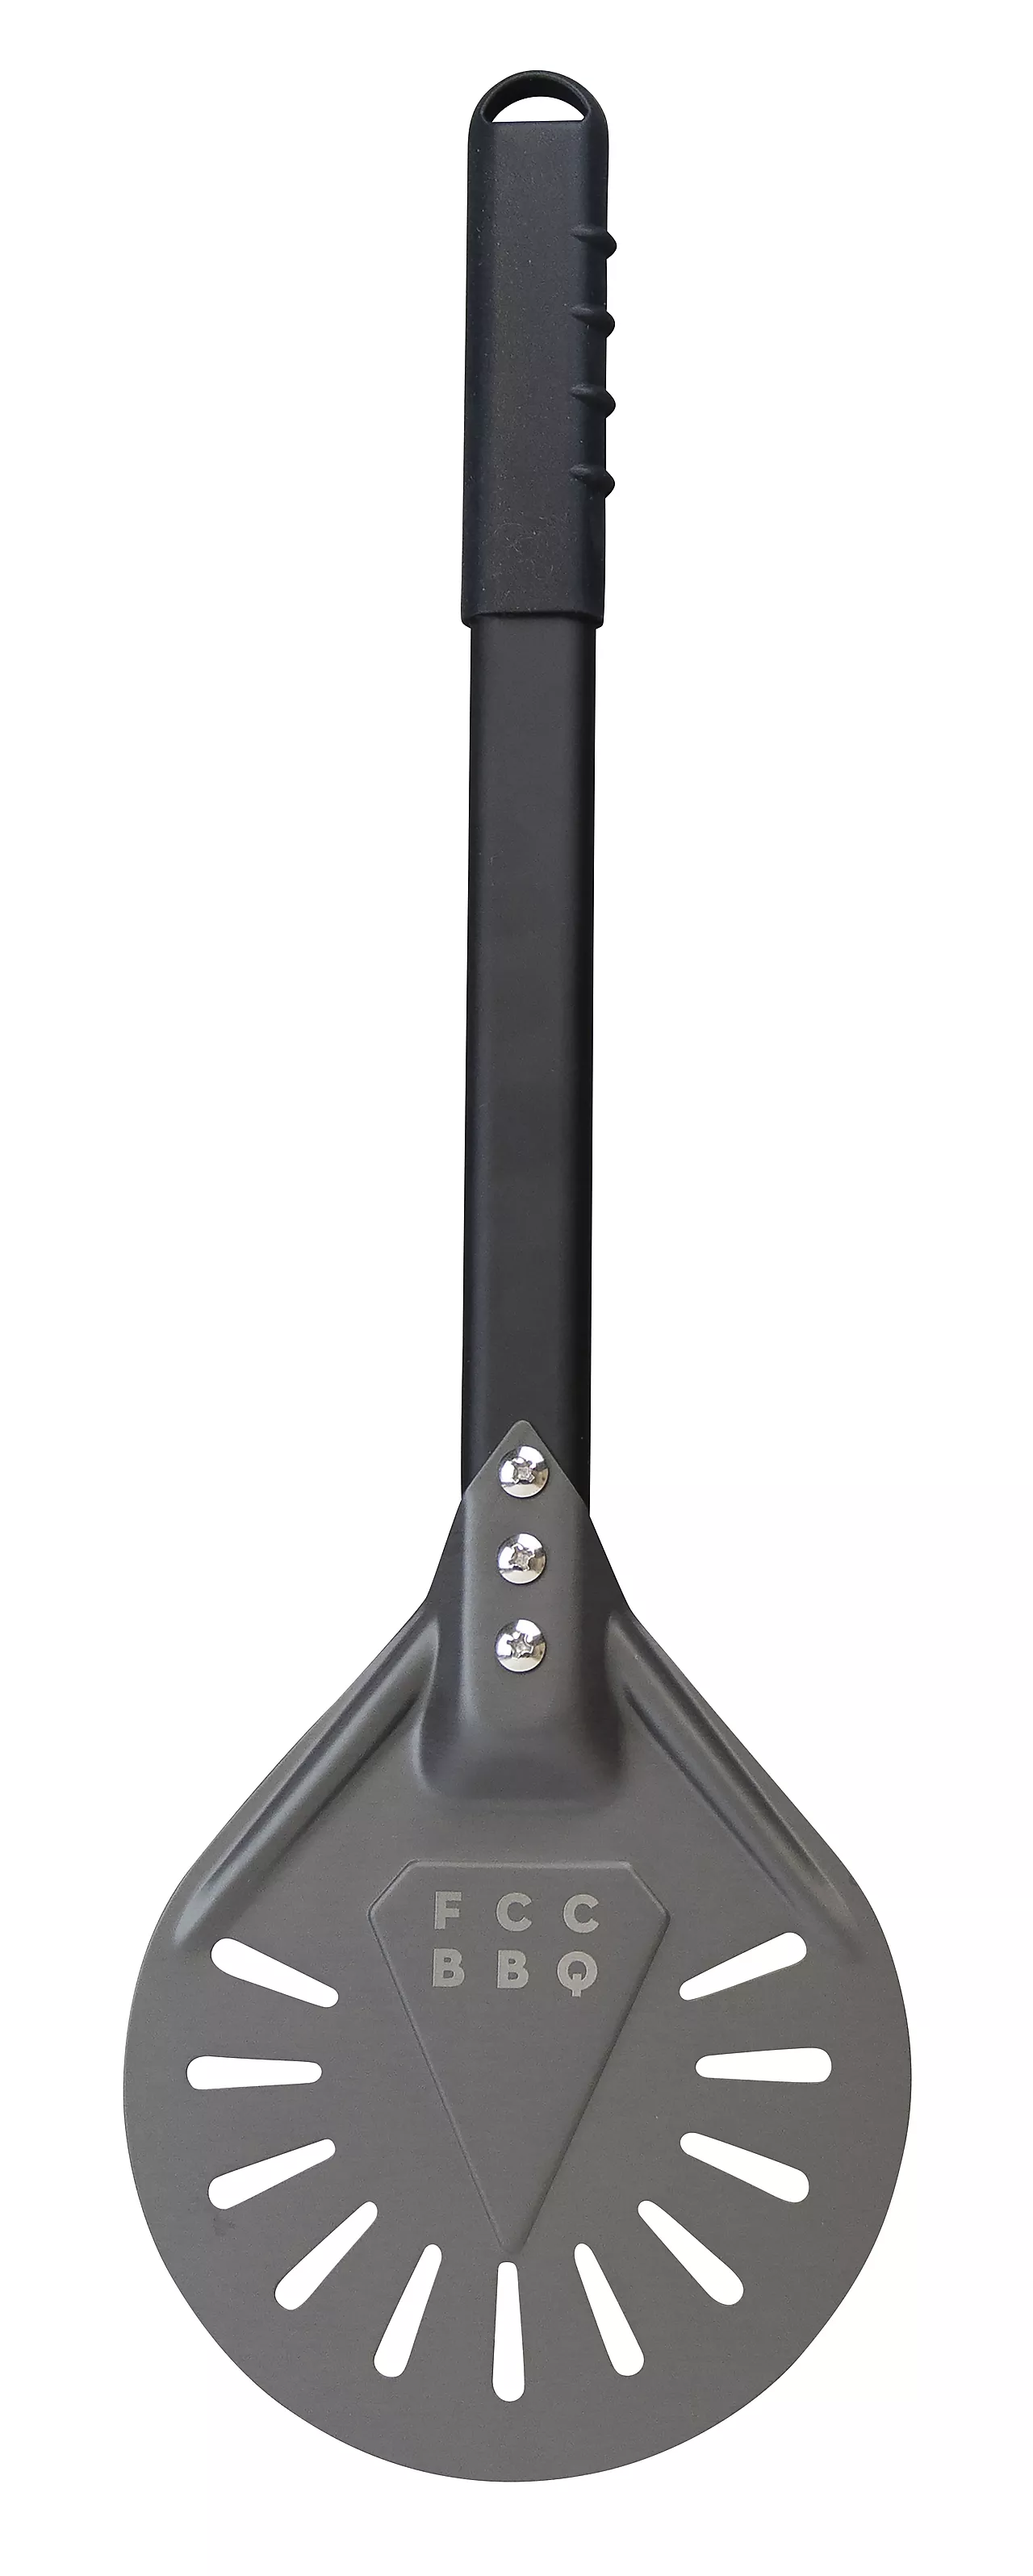 Roteringsspade BBQ for pizza null - null - 3